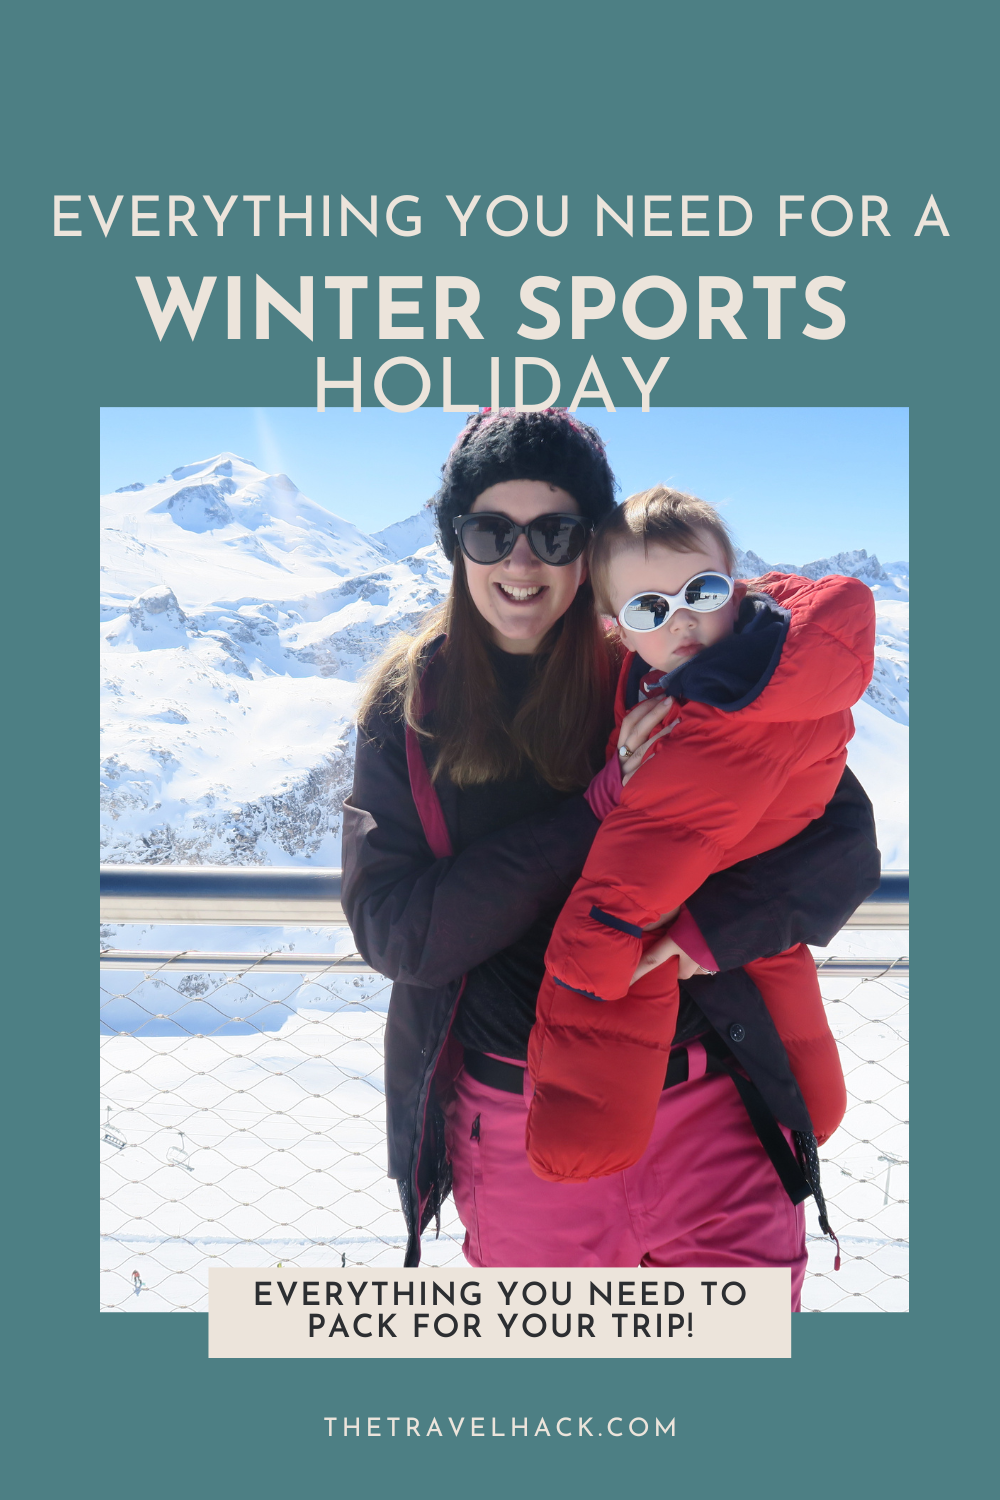 What to pack for a winter sports holiday